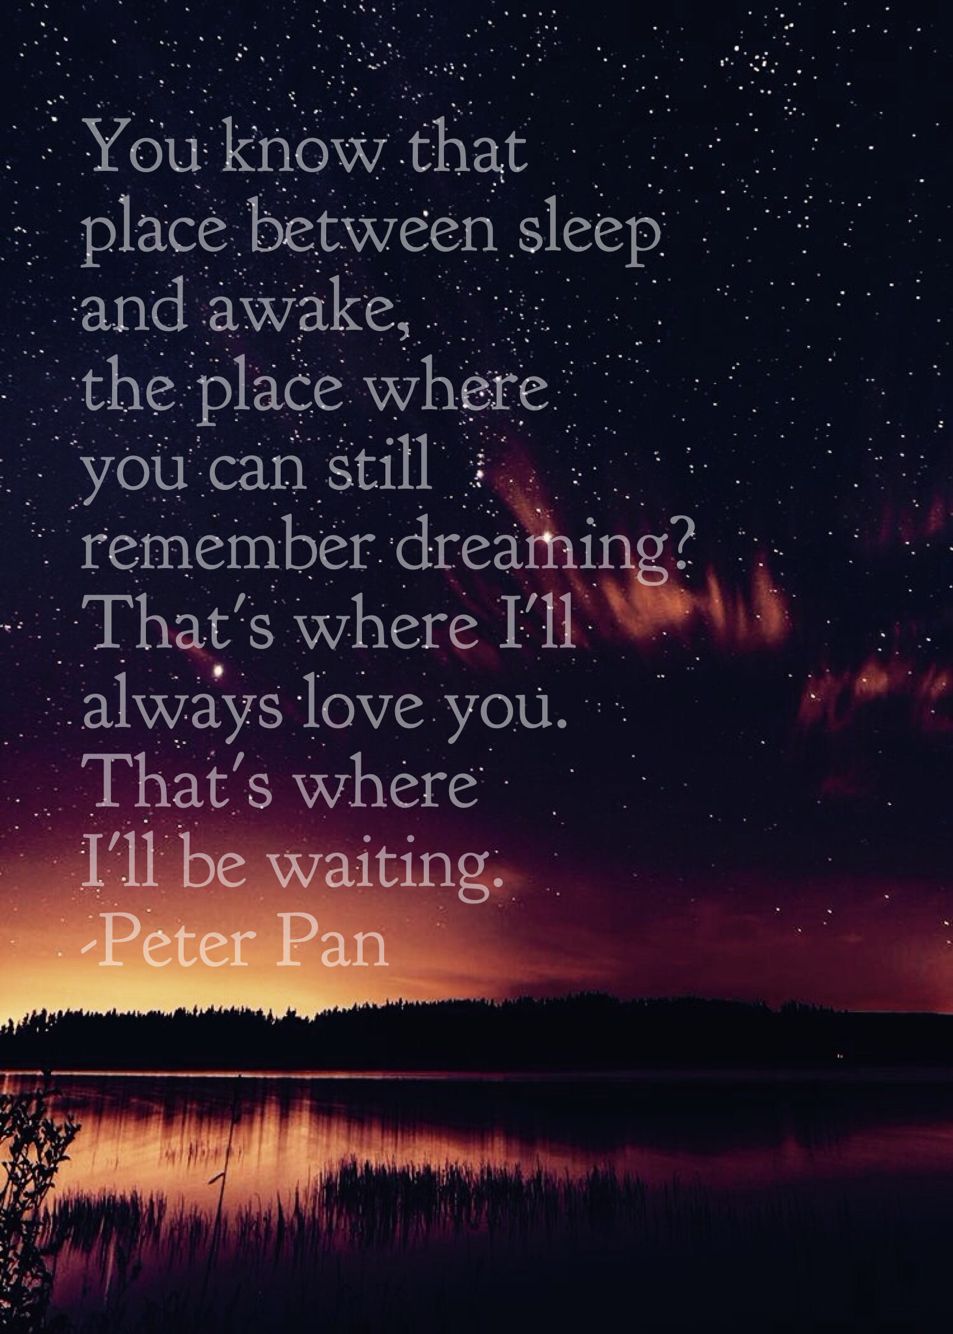 Peter Pan quote on a starry night background - Peter Pan